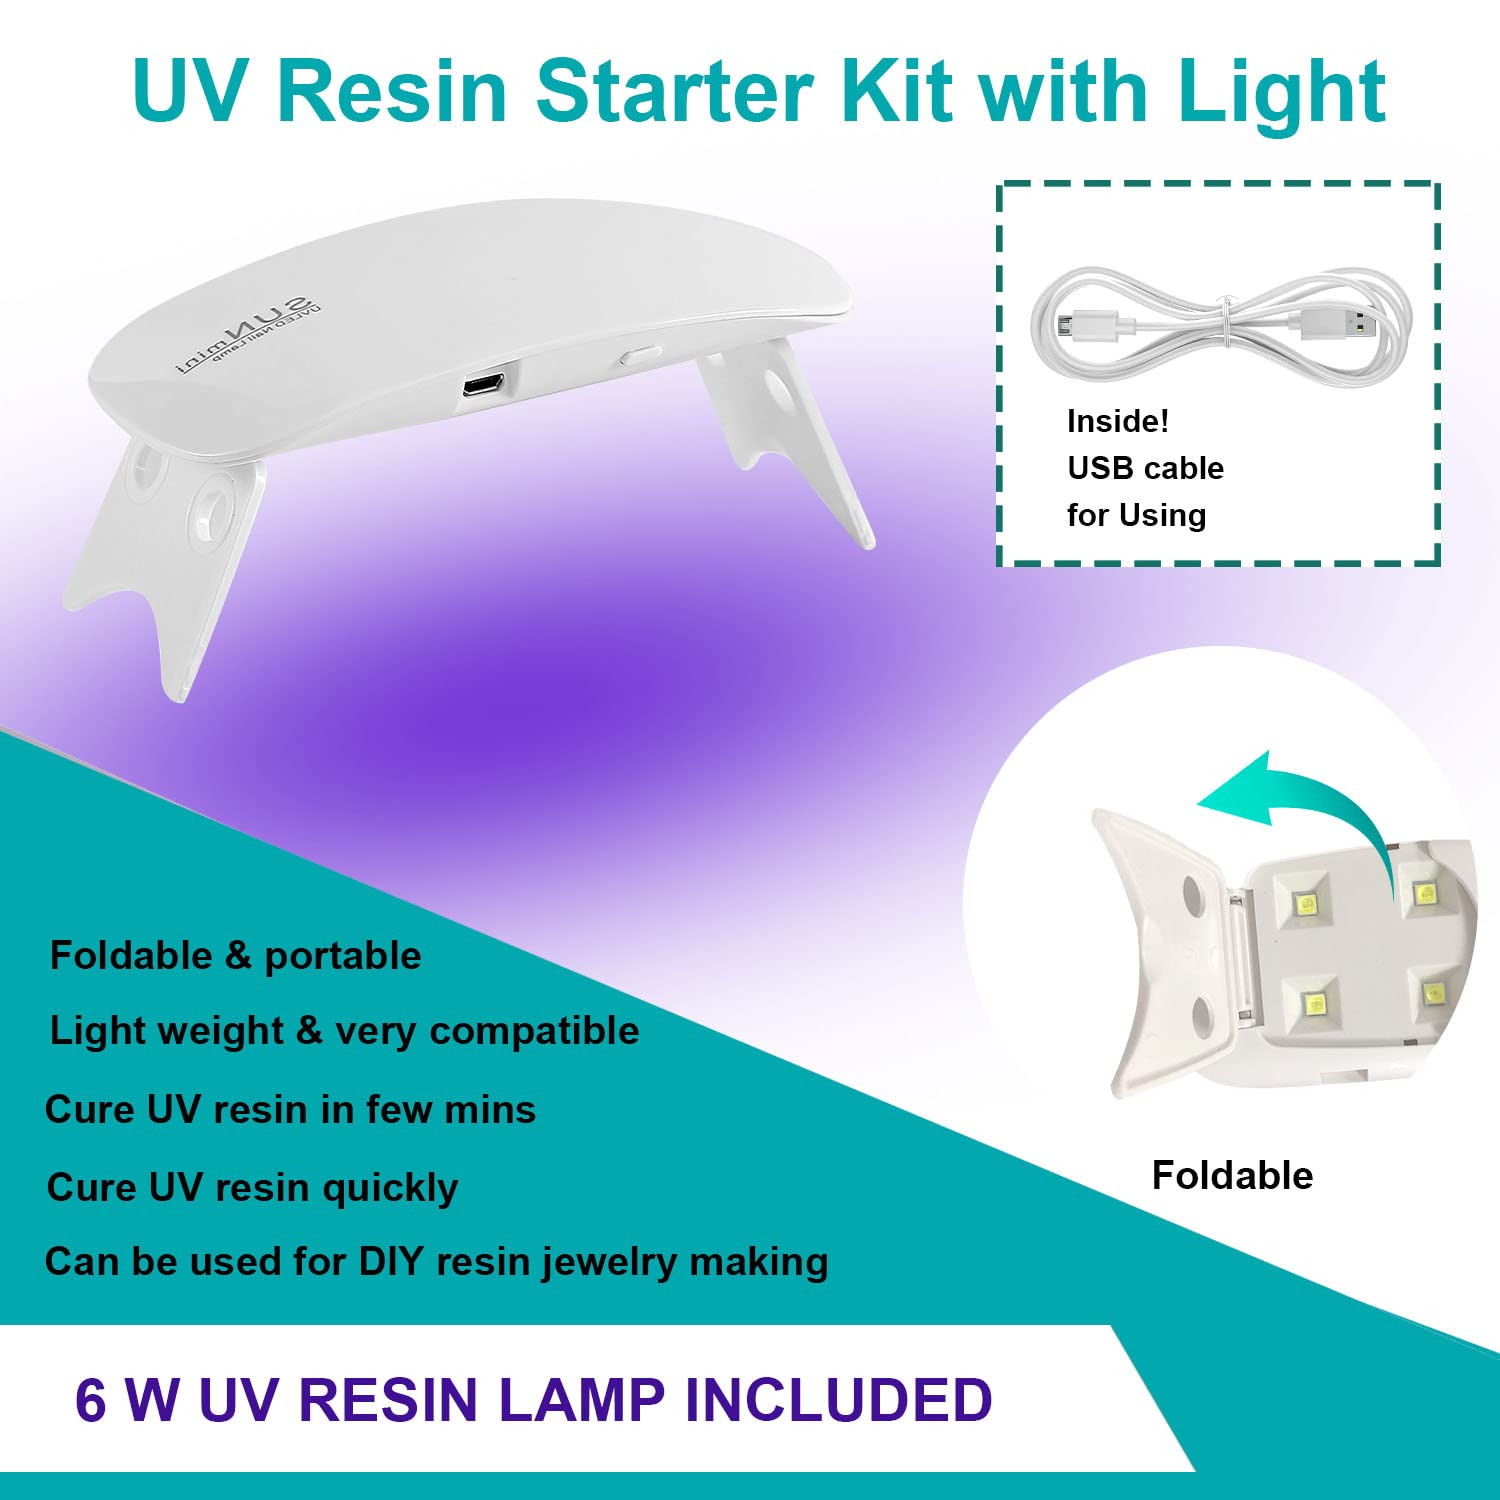 27 PCS UV Resin Kit with Light - 200g Upgraded Hard Type Crystal Clear  Ultraviolet Curing UV Resin Kit, 36W Lamp Beads UV Light, UV Resin with  Light for Craft Jewelry Making